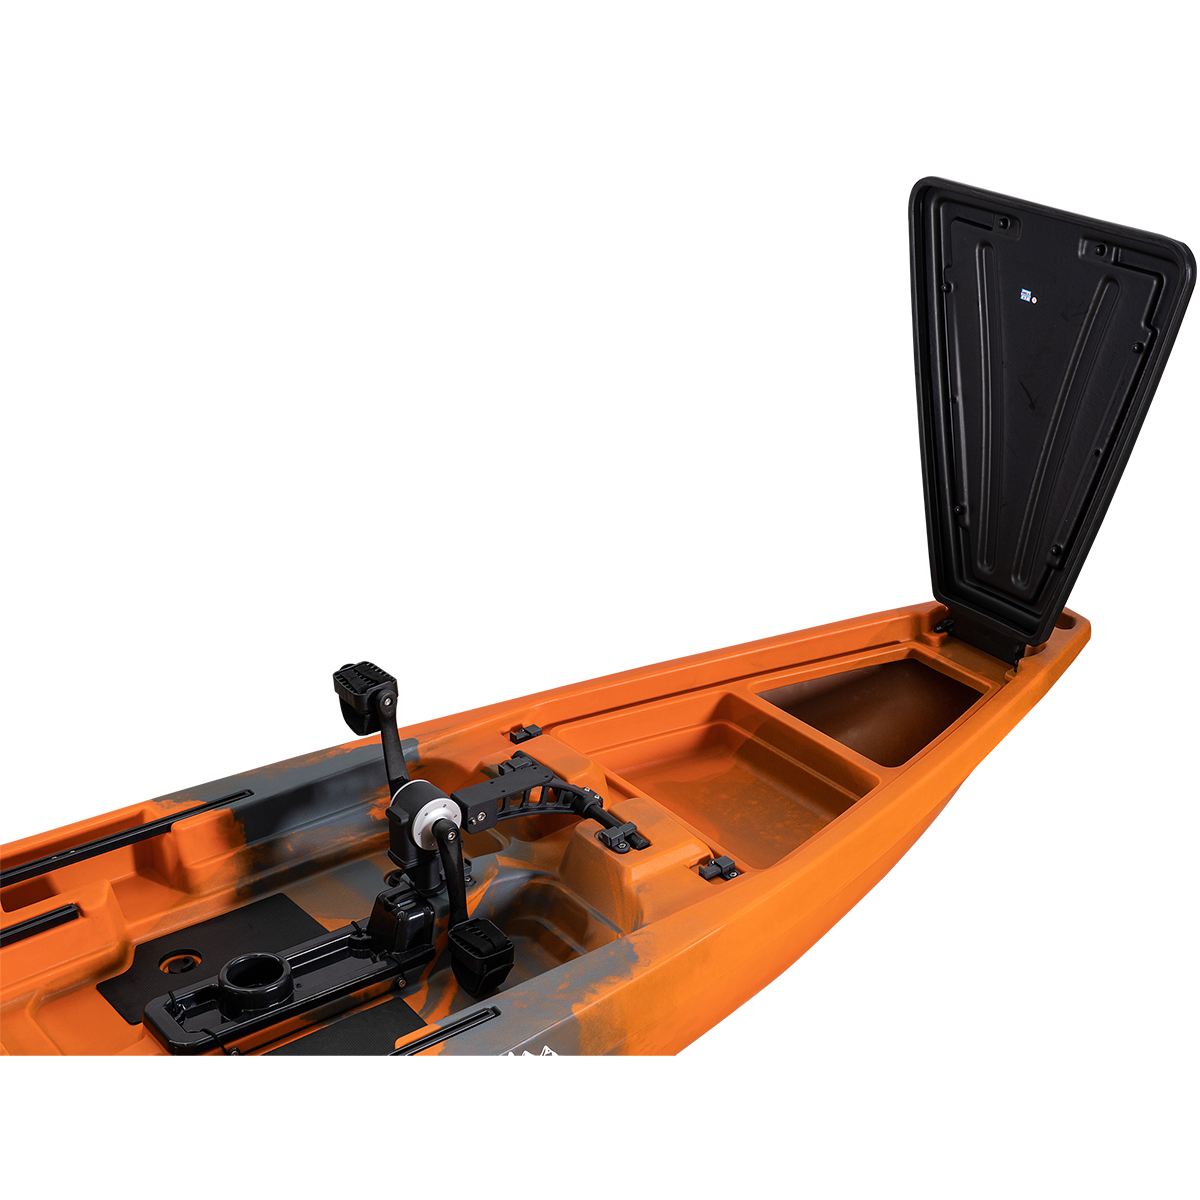 Angler Pro 10 Fishing Kayak with rudder system – Lakeview